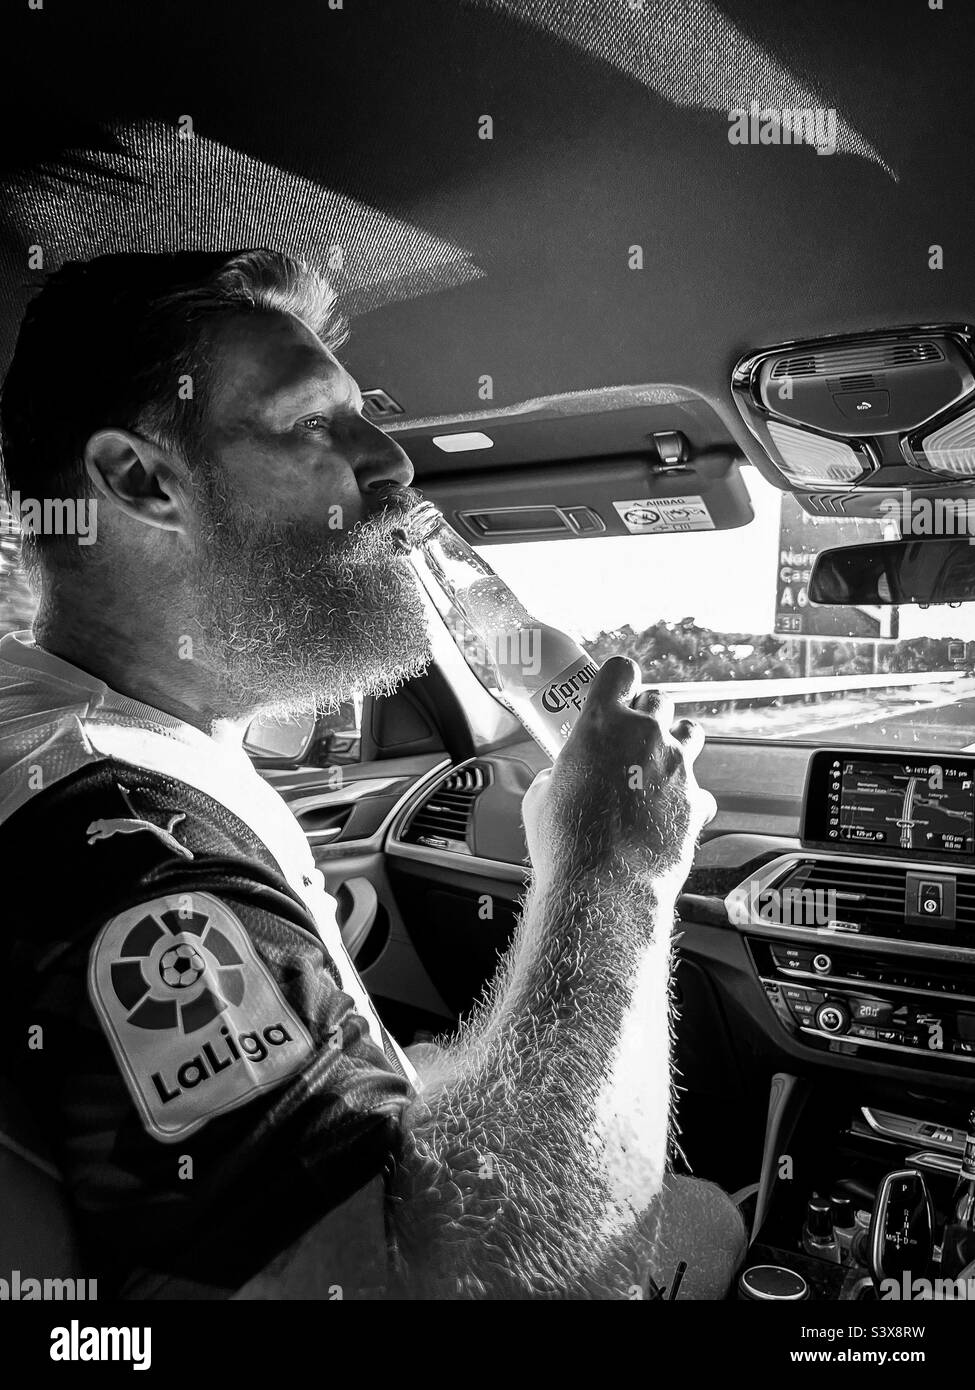 Hairy man drinking beer in car as a passenger while driving Stock Photo